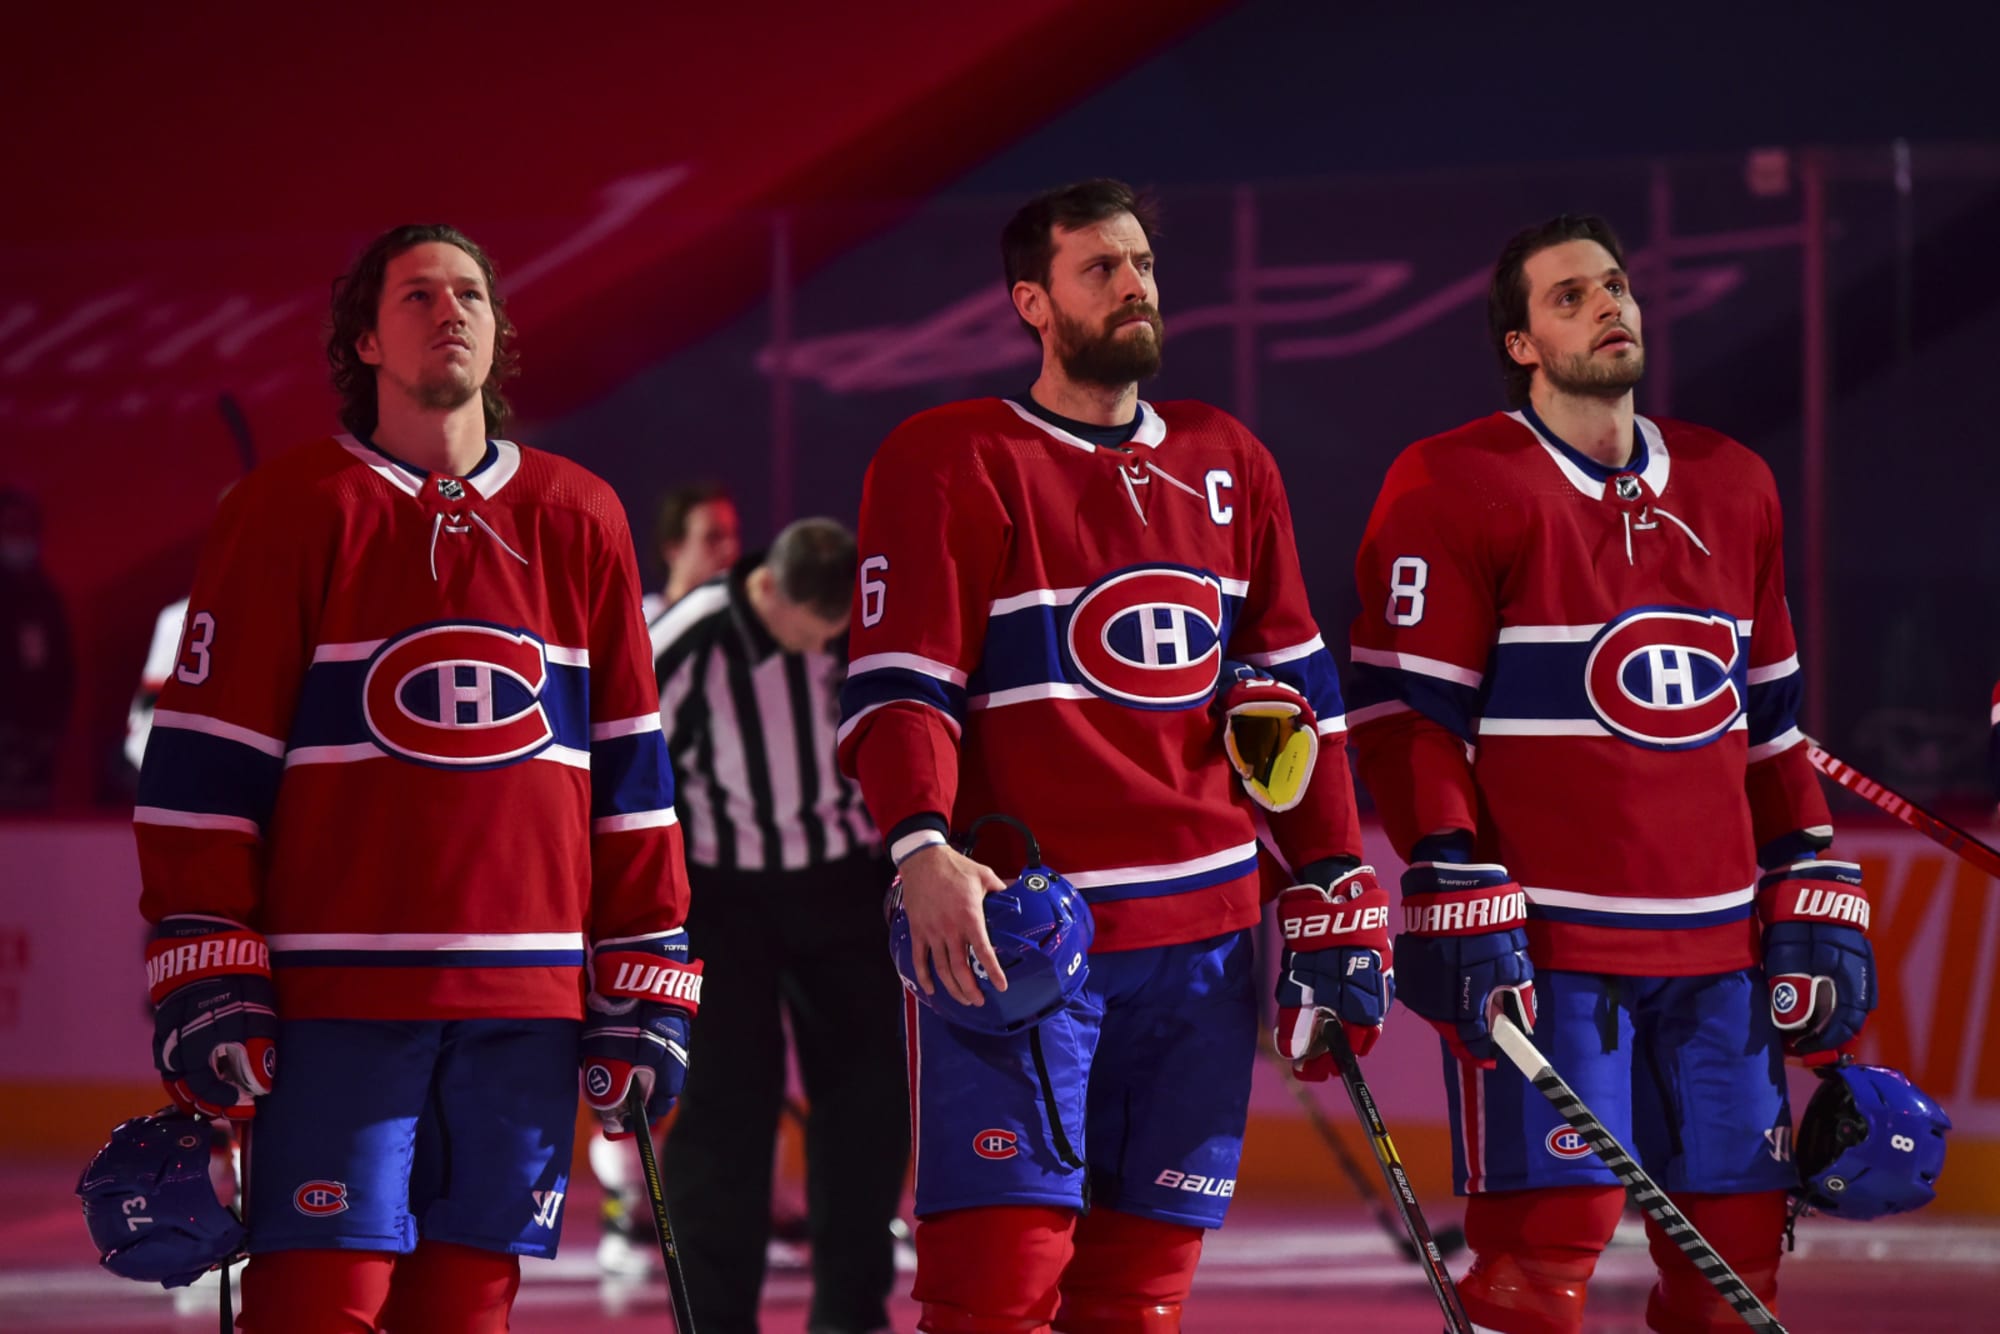 For fans of the Montreal Canadiens, it really 'Feels like '93' again